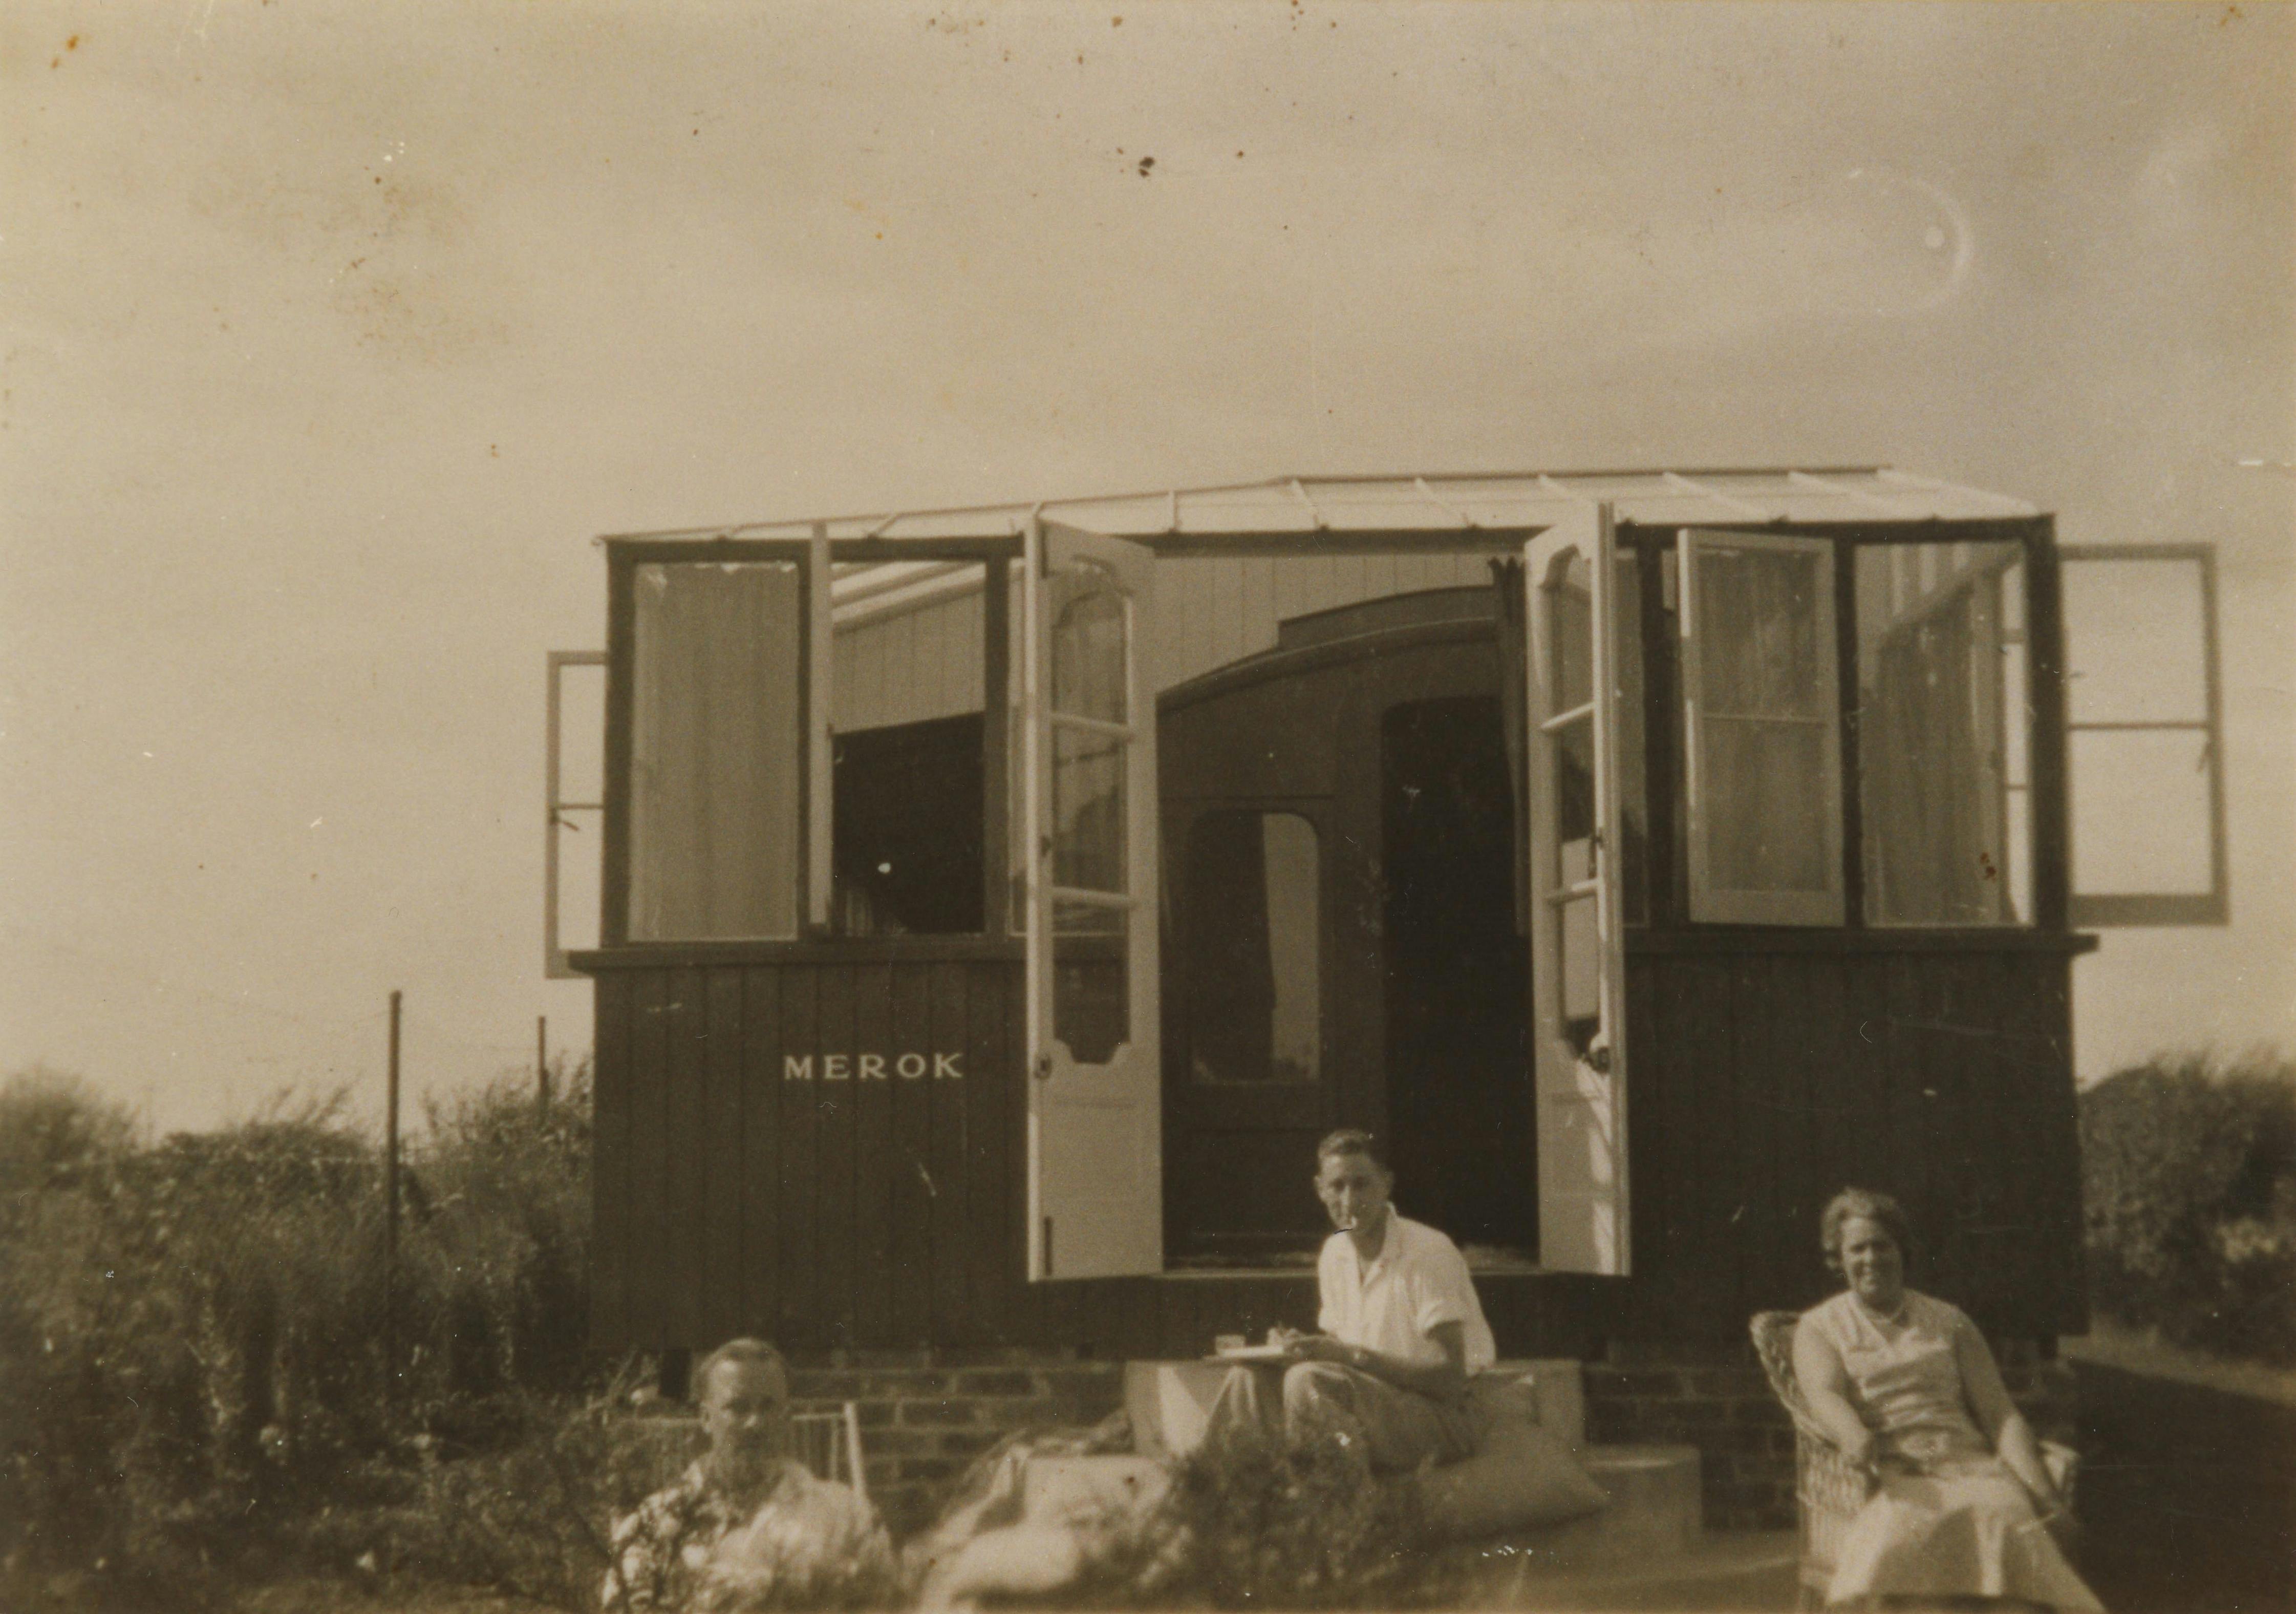 Railway Carriage Holiday Home, Mid 20th Century, courtesy of Selsey Photo Archive